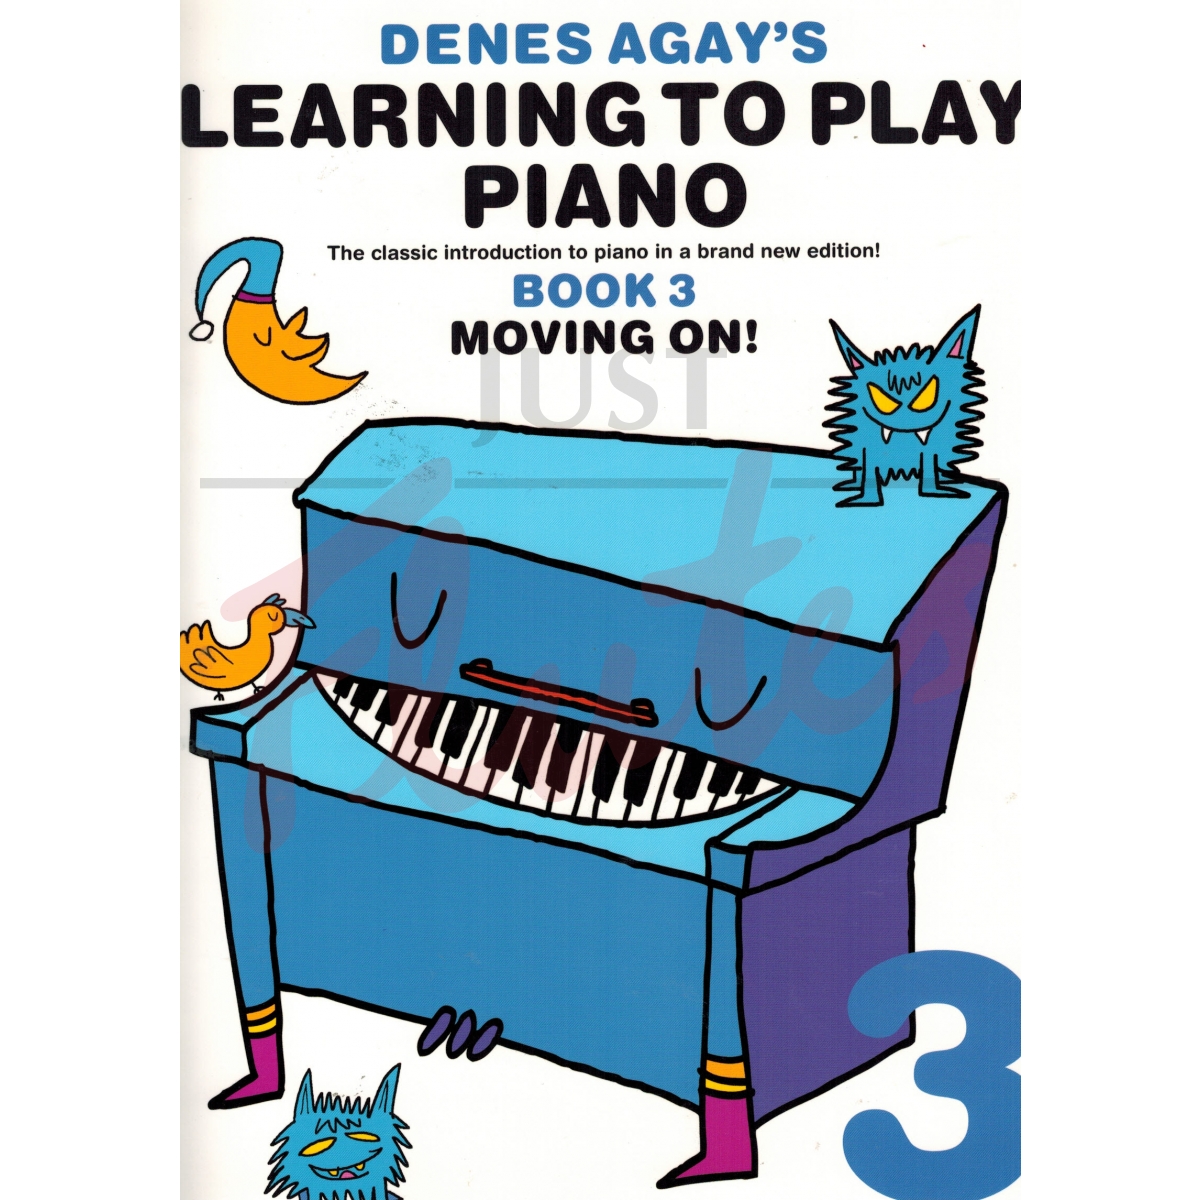 Learning To Play Piano Book 3 - Moving On!